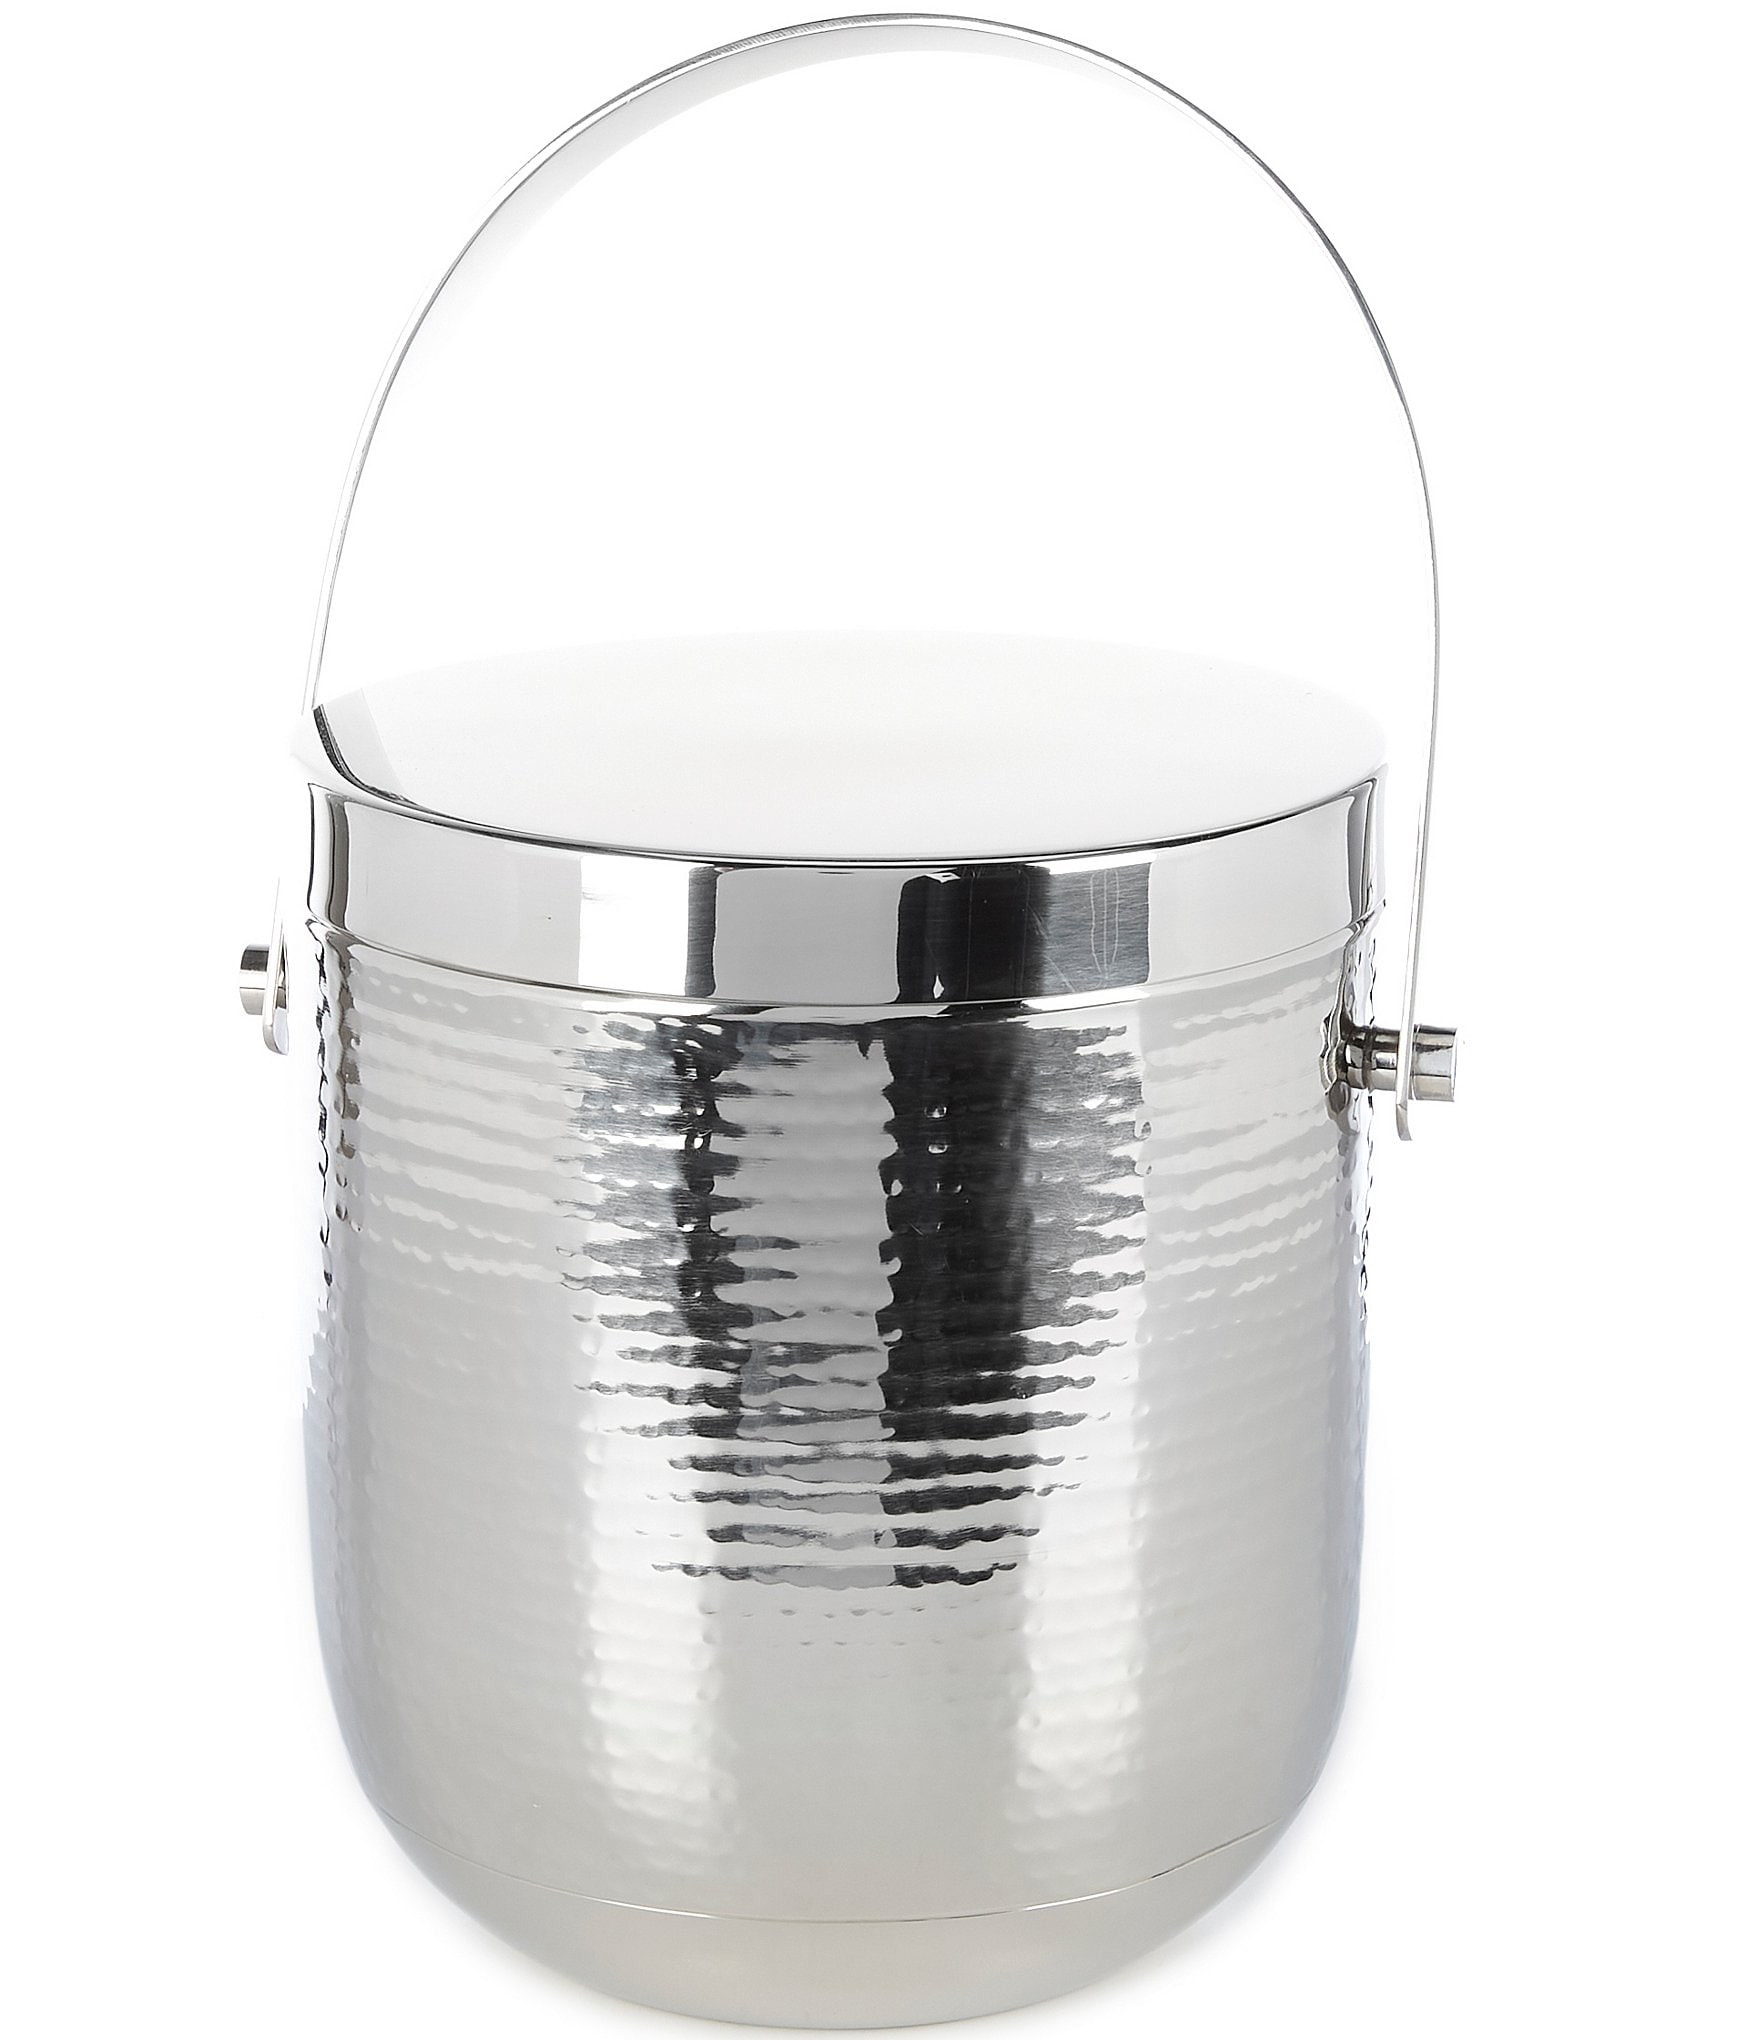 Hammered Metal Ice Bucket With Ice Scoop - Threshold™ : Target